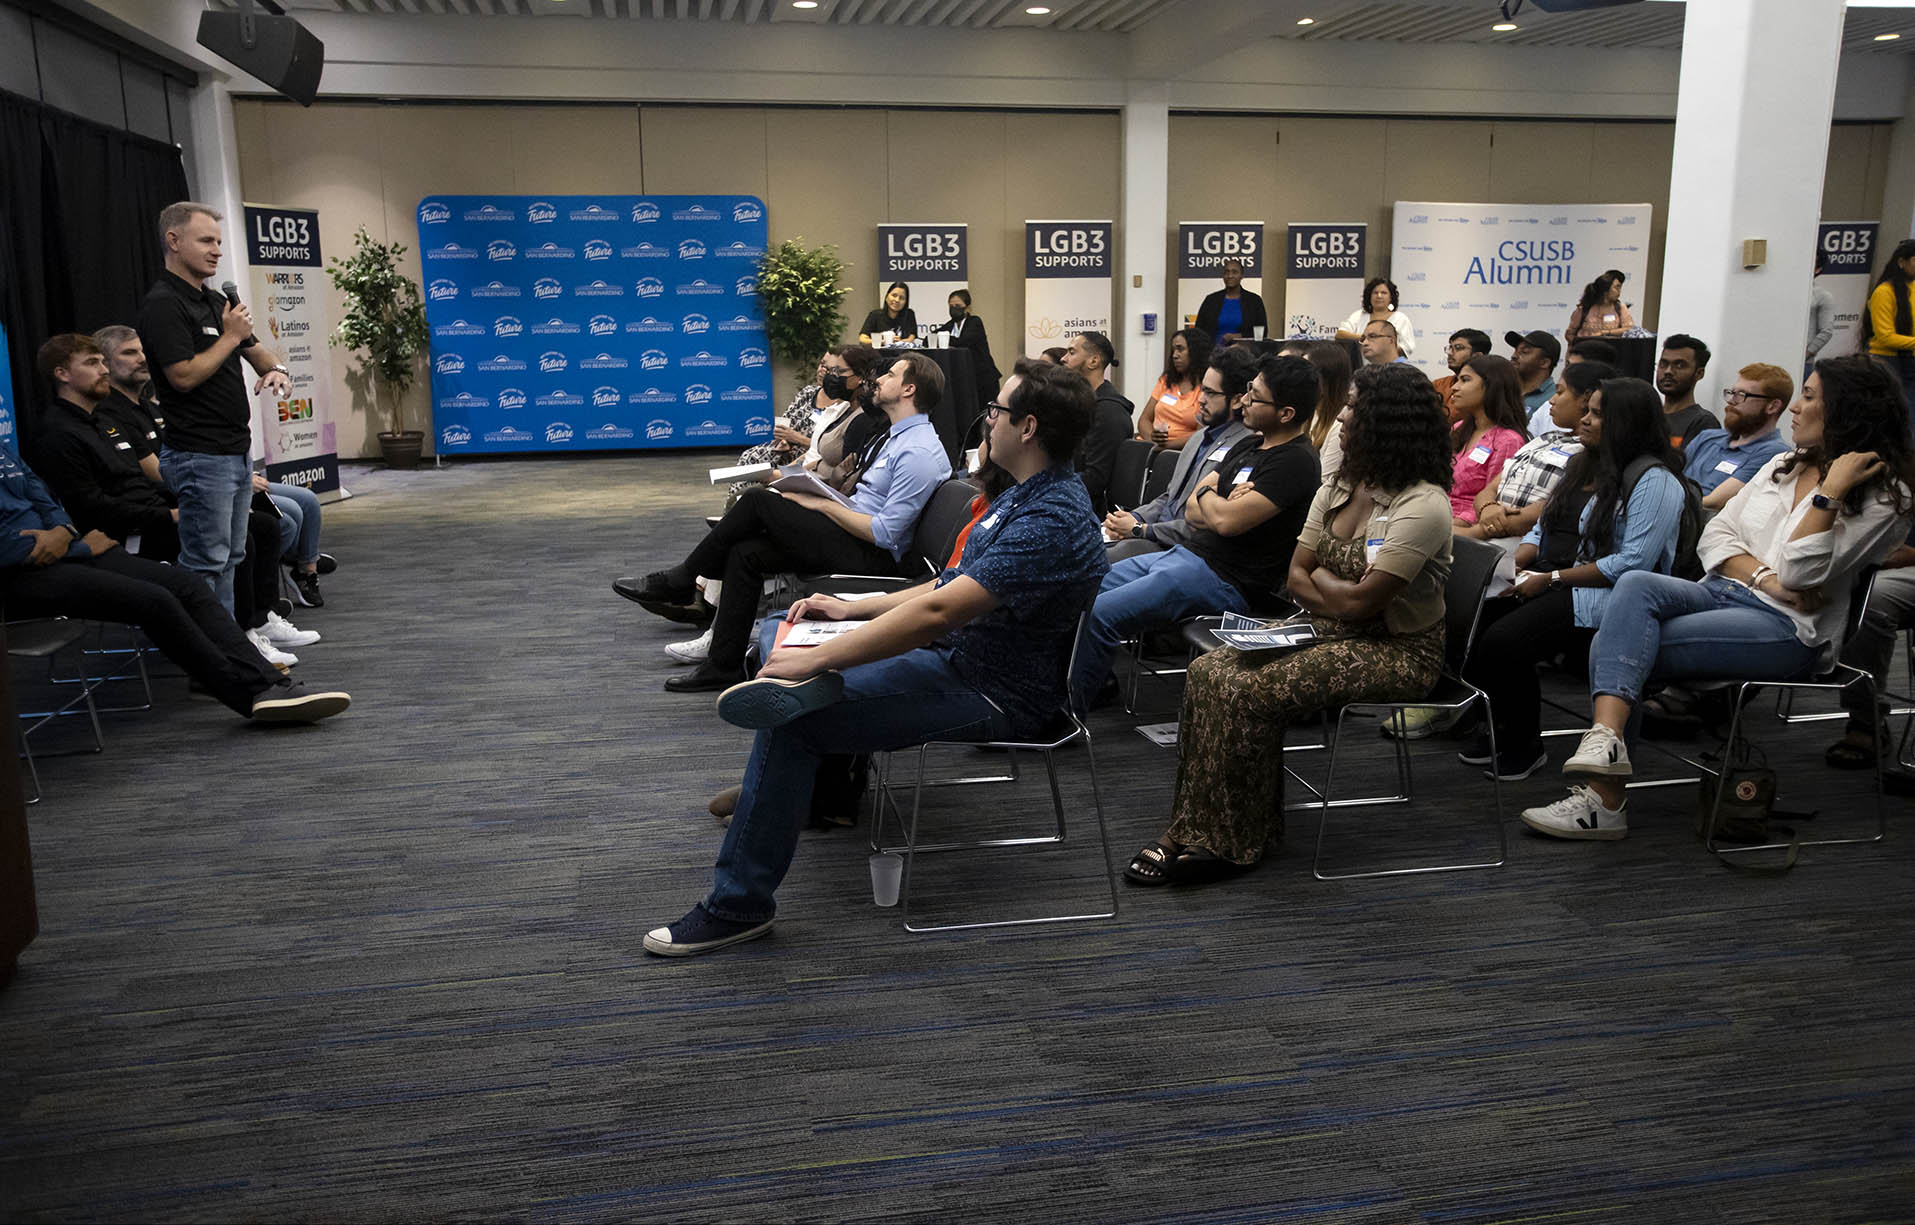 A presentation by Amazon representatives at the career event co-hosted with CSUSB Alumni